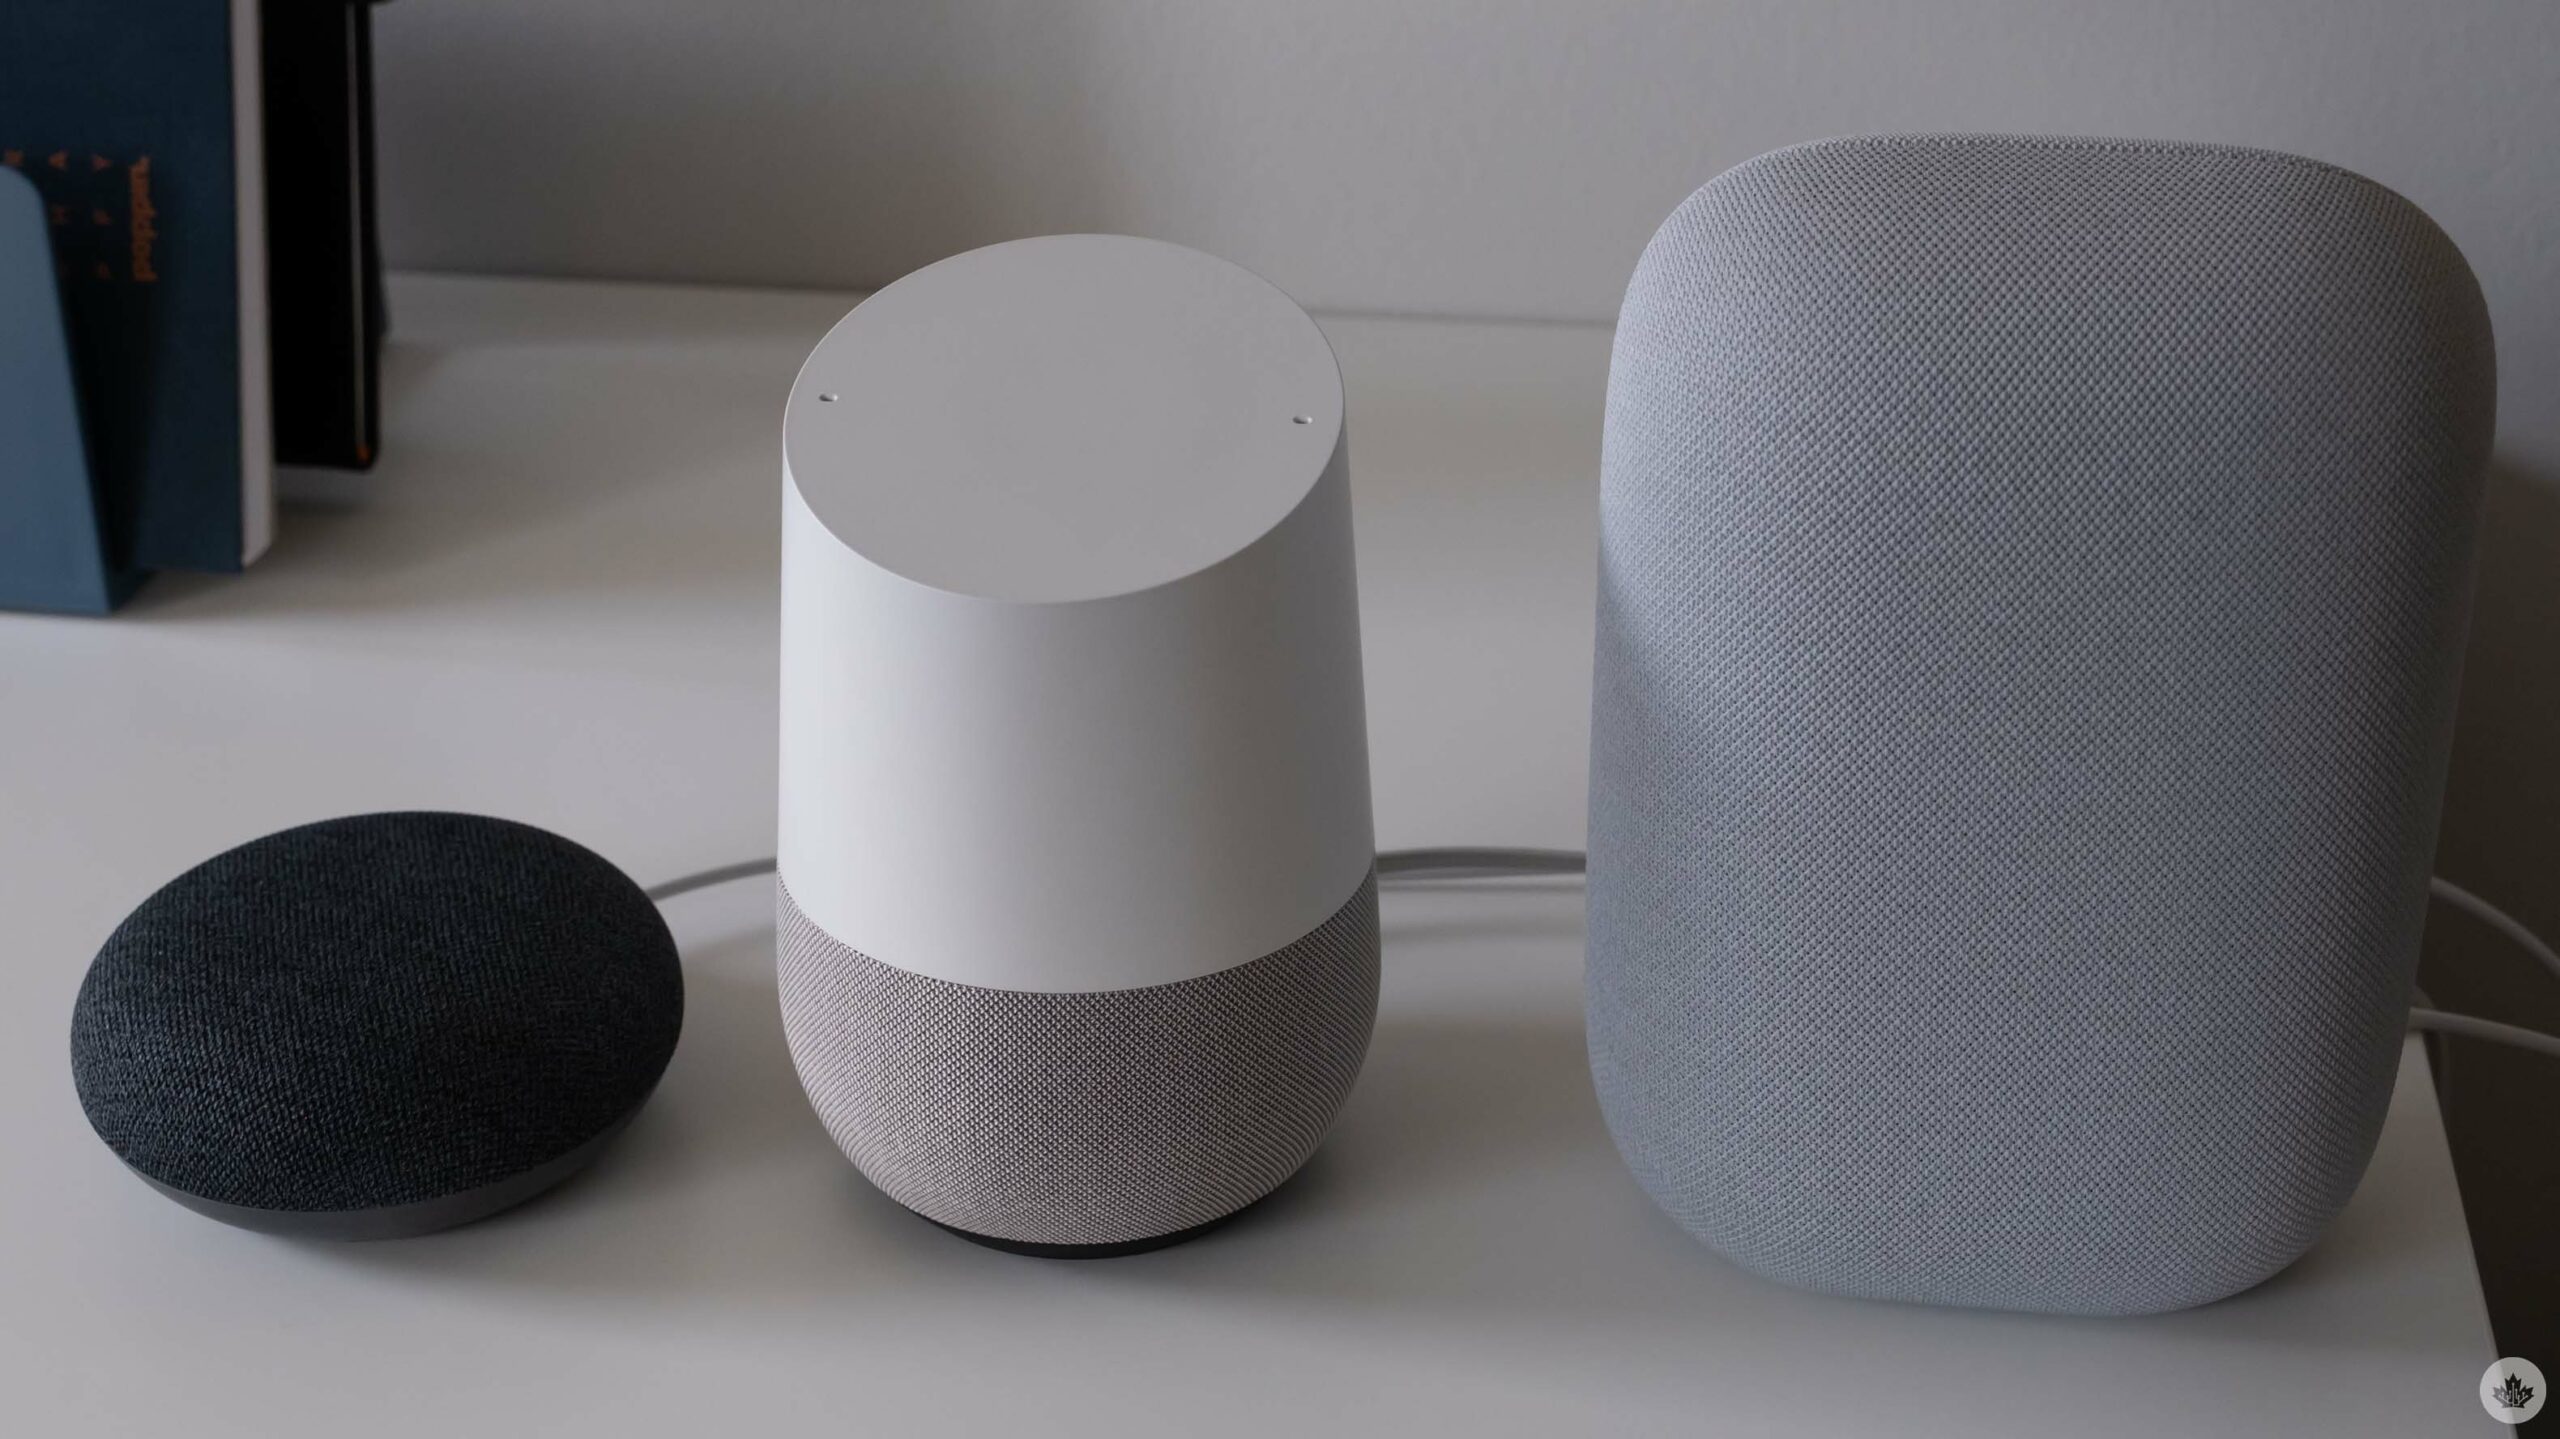 Changes coming Google Nest Speaker Group controls, device set-up following Sonos ruling